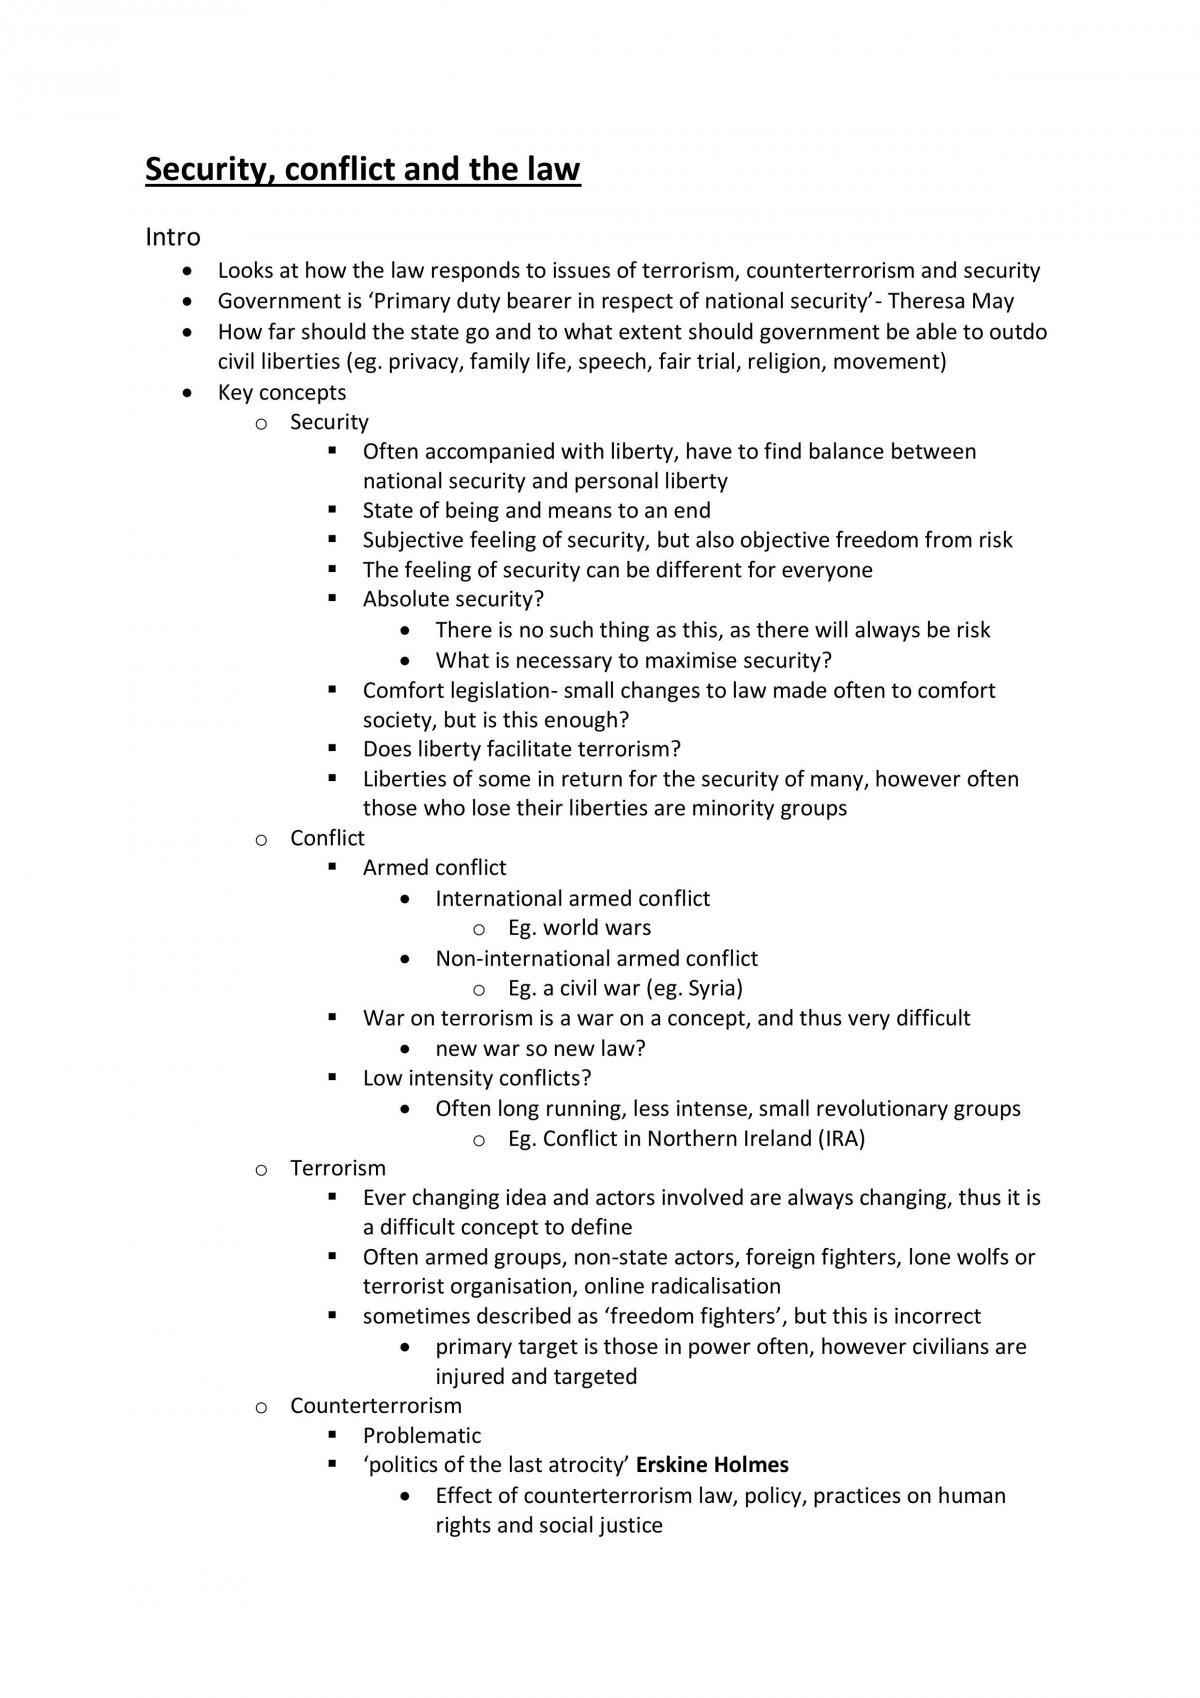 Security, Conflict and the Law full notes - Page 1